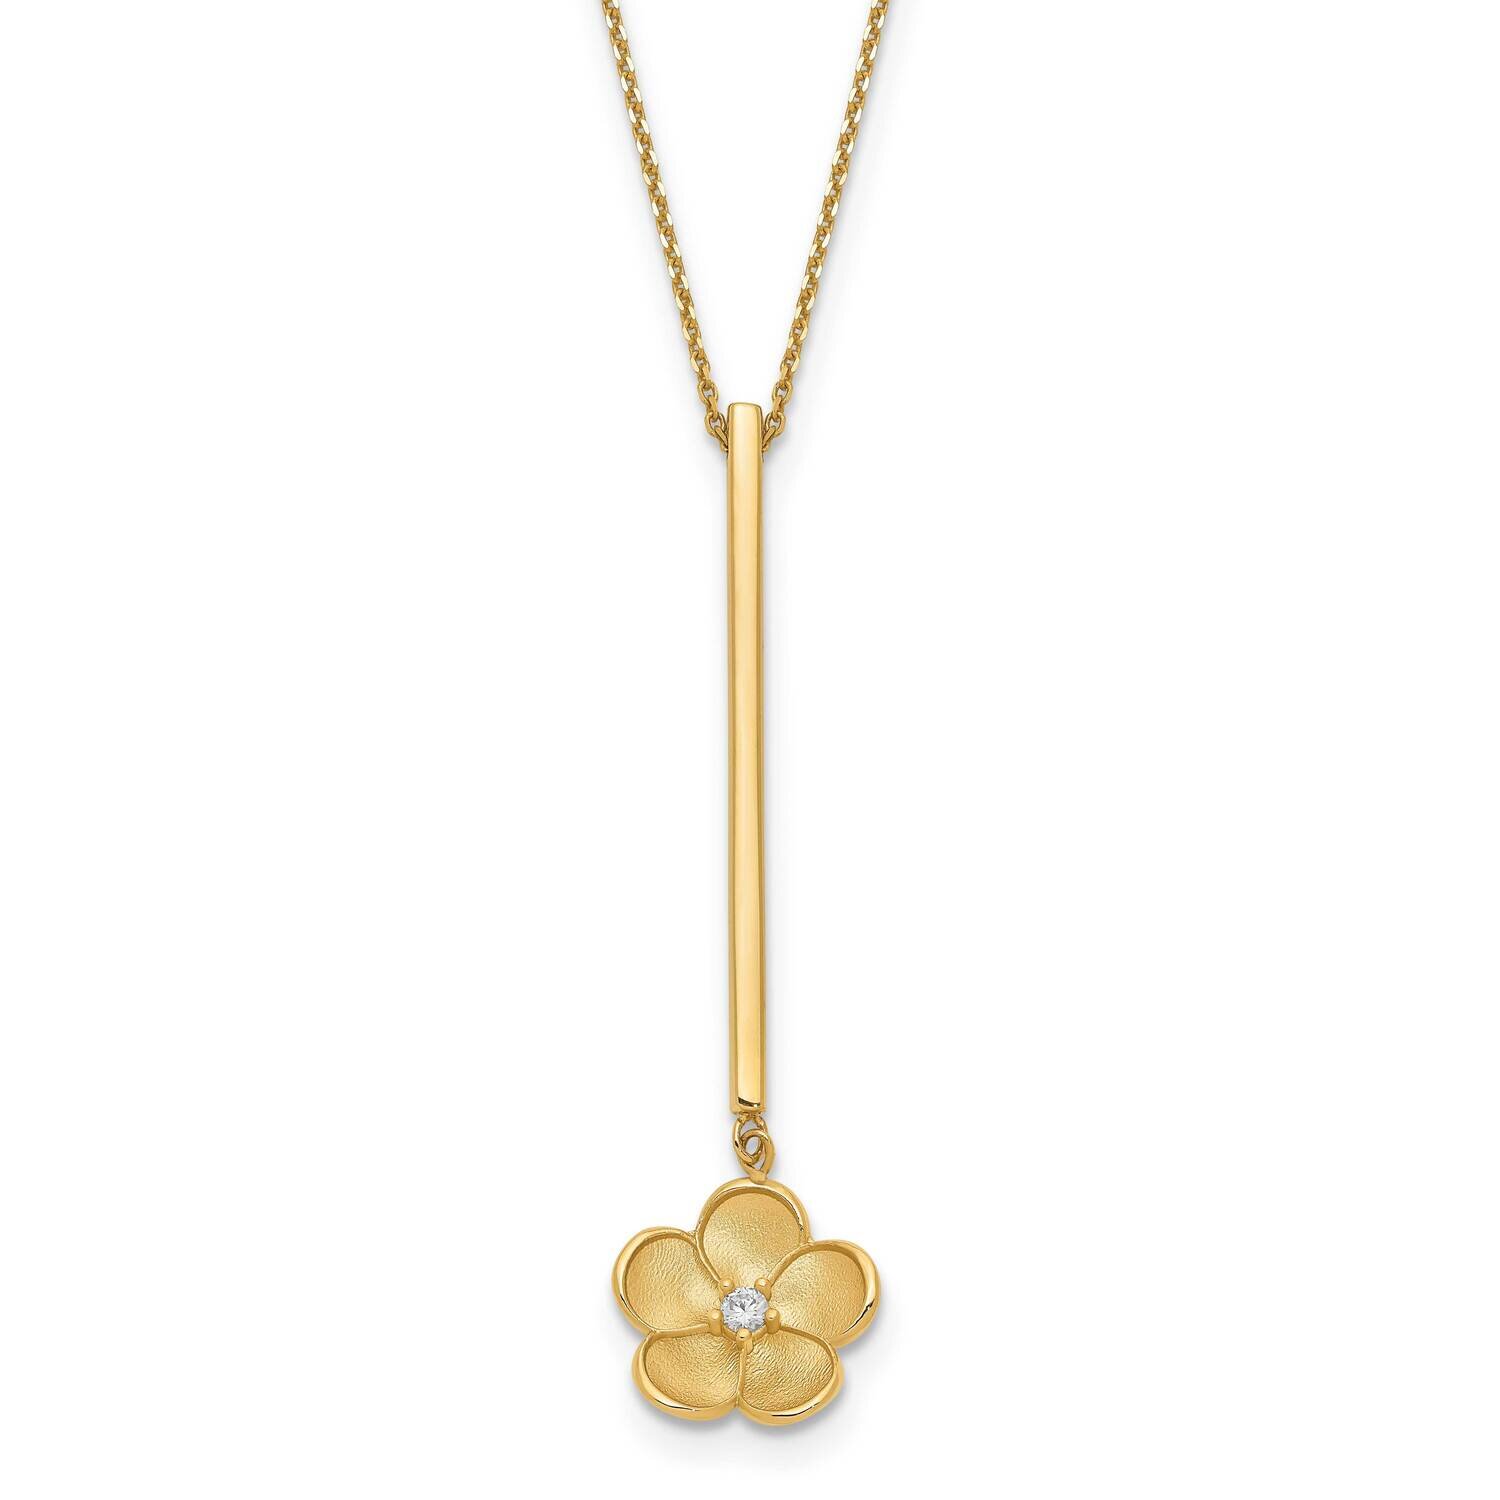 Satin Flower Dangle CZ Diamond with 2 In Extender Necklace 16 Inch 14k Gold Polished SF2904-16